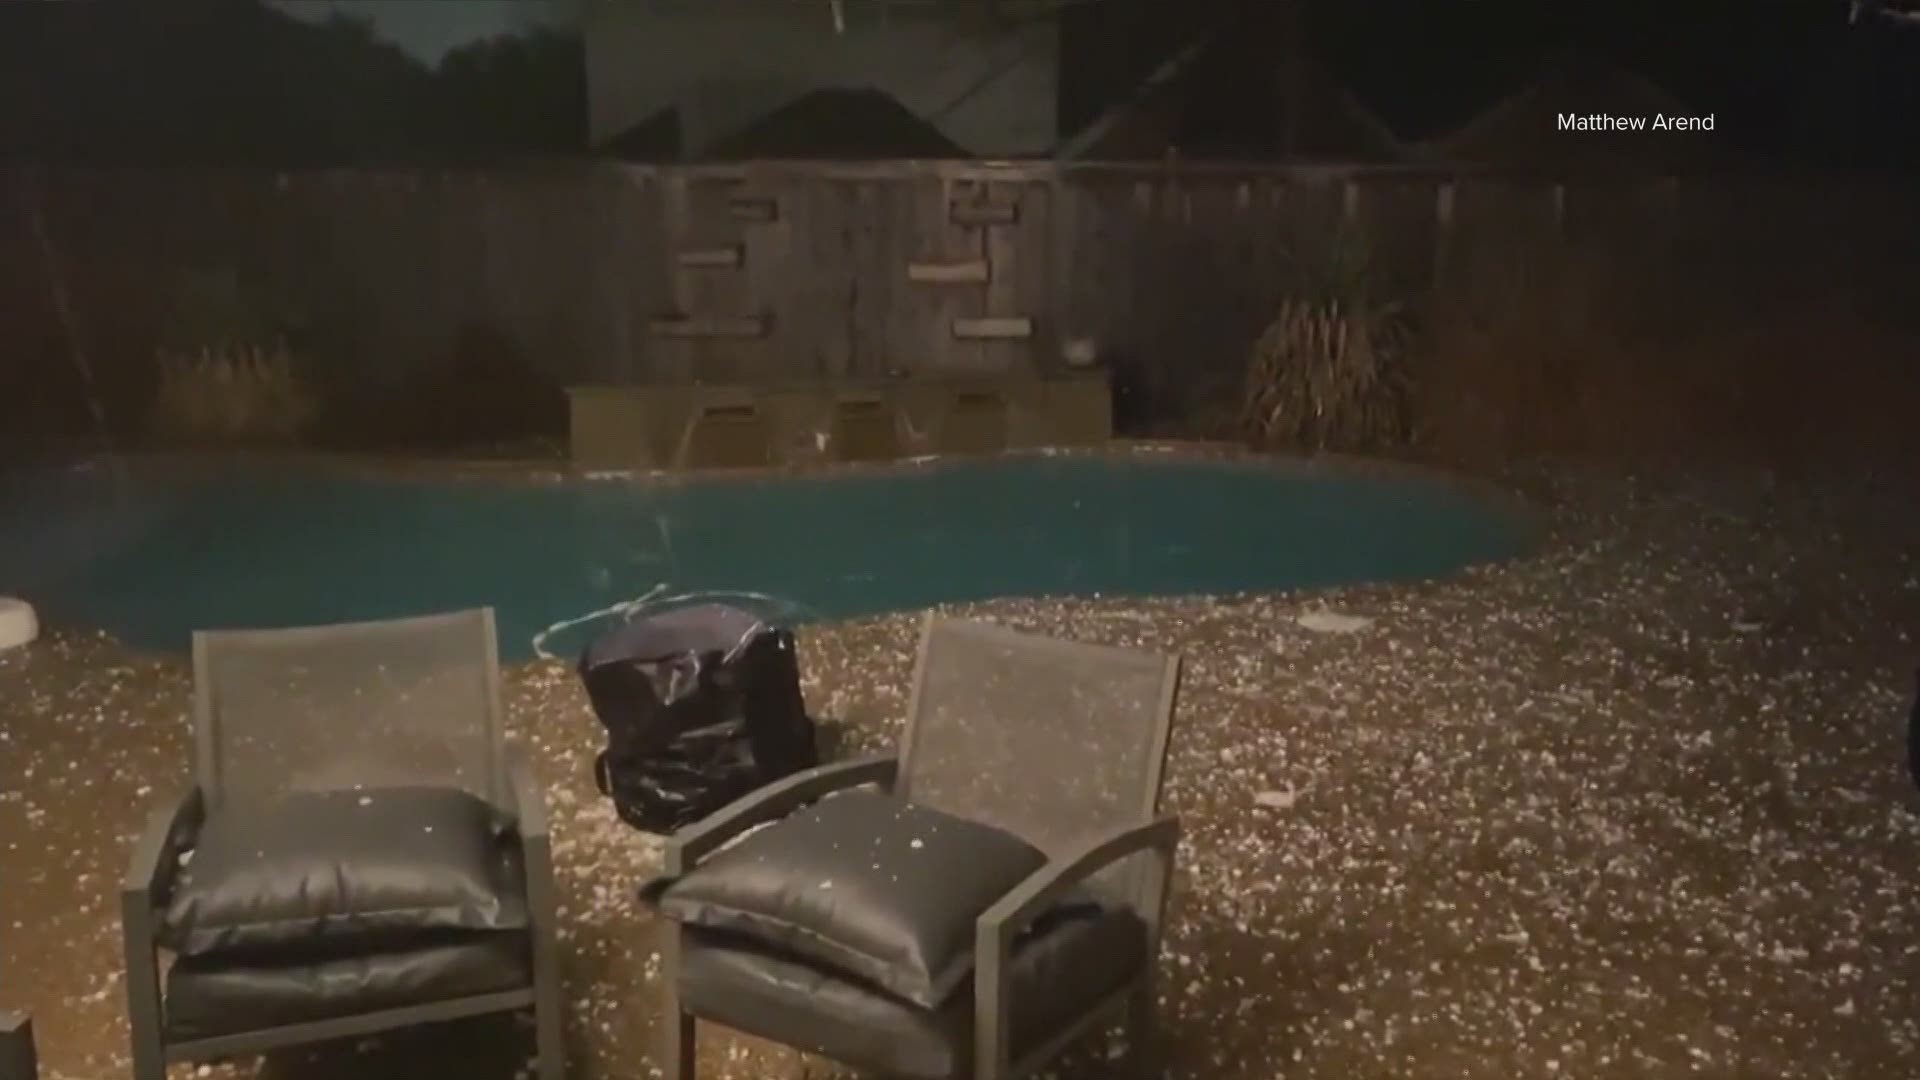 “Texas actually ranks number one in the country for hail losses,” State Farm spokesperson Chris Pilcic said.